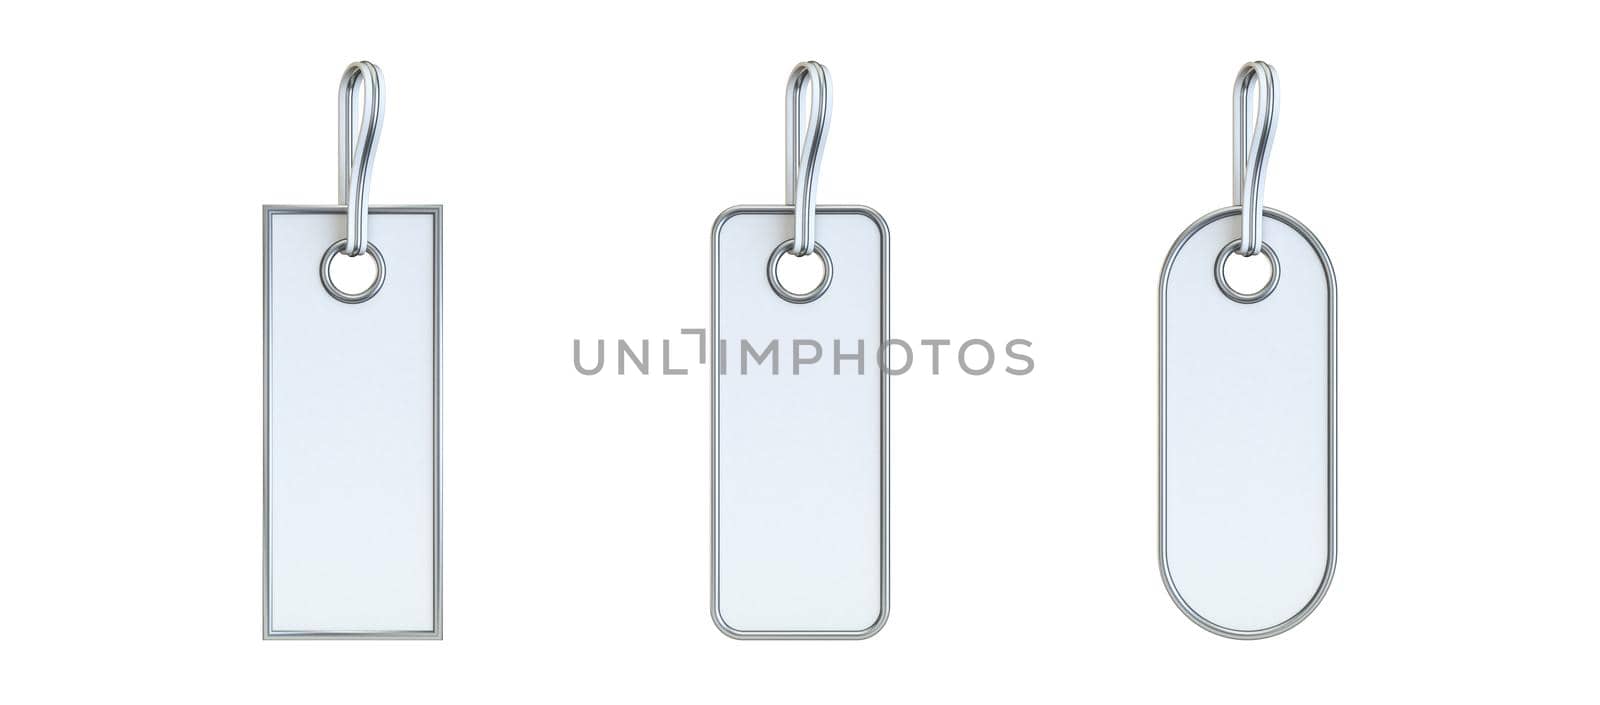 White copy space empty price tag collection 3D render illustration isolated on white background